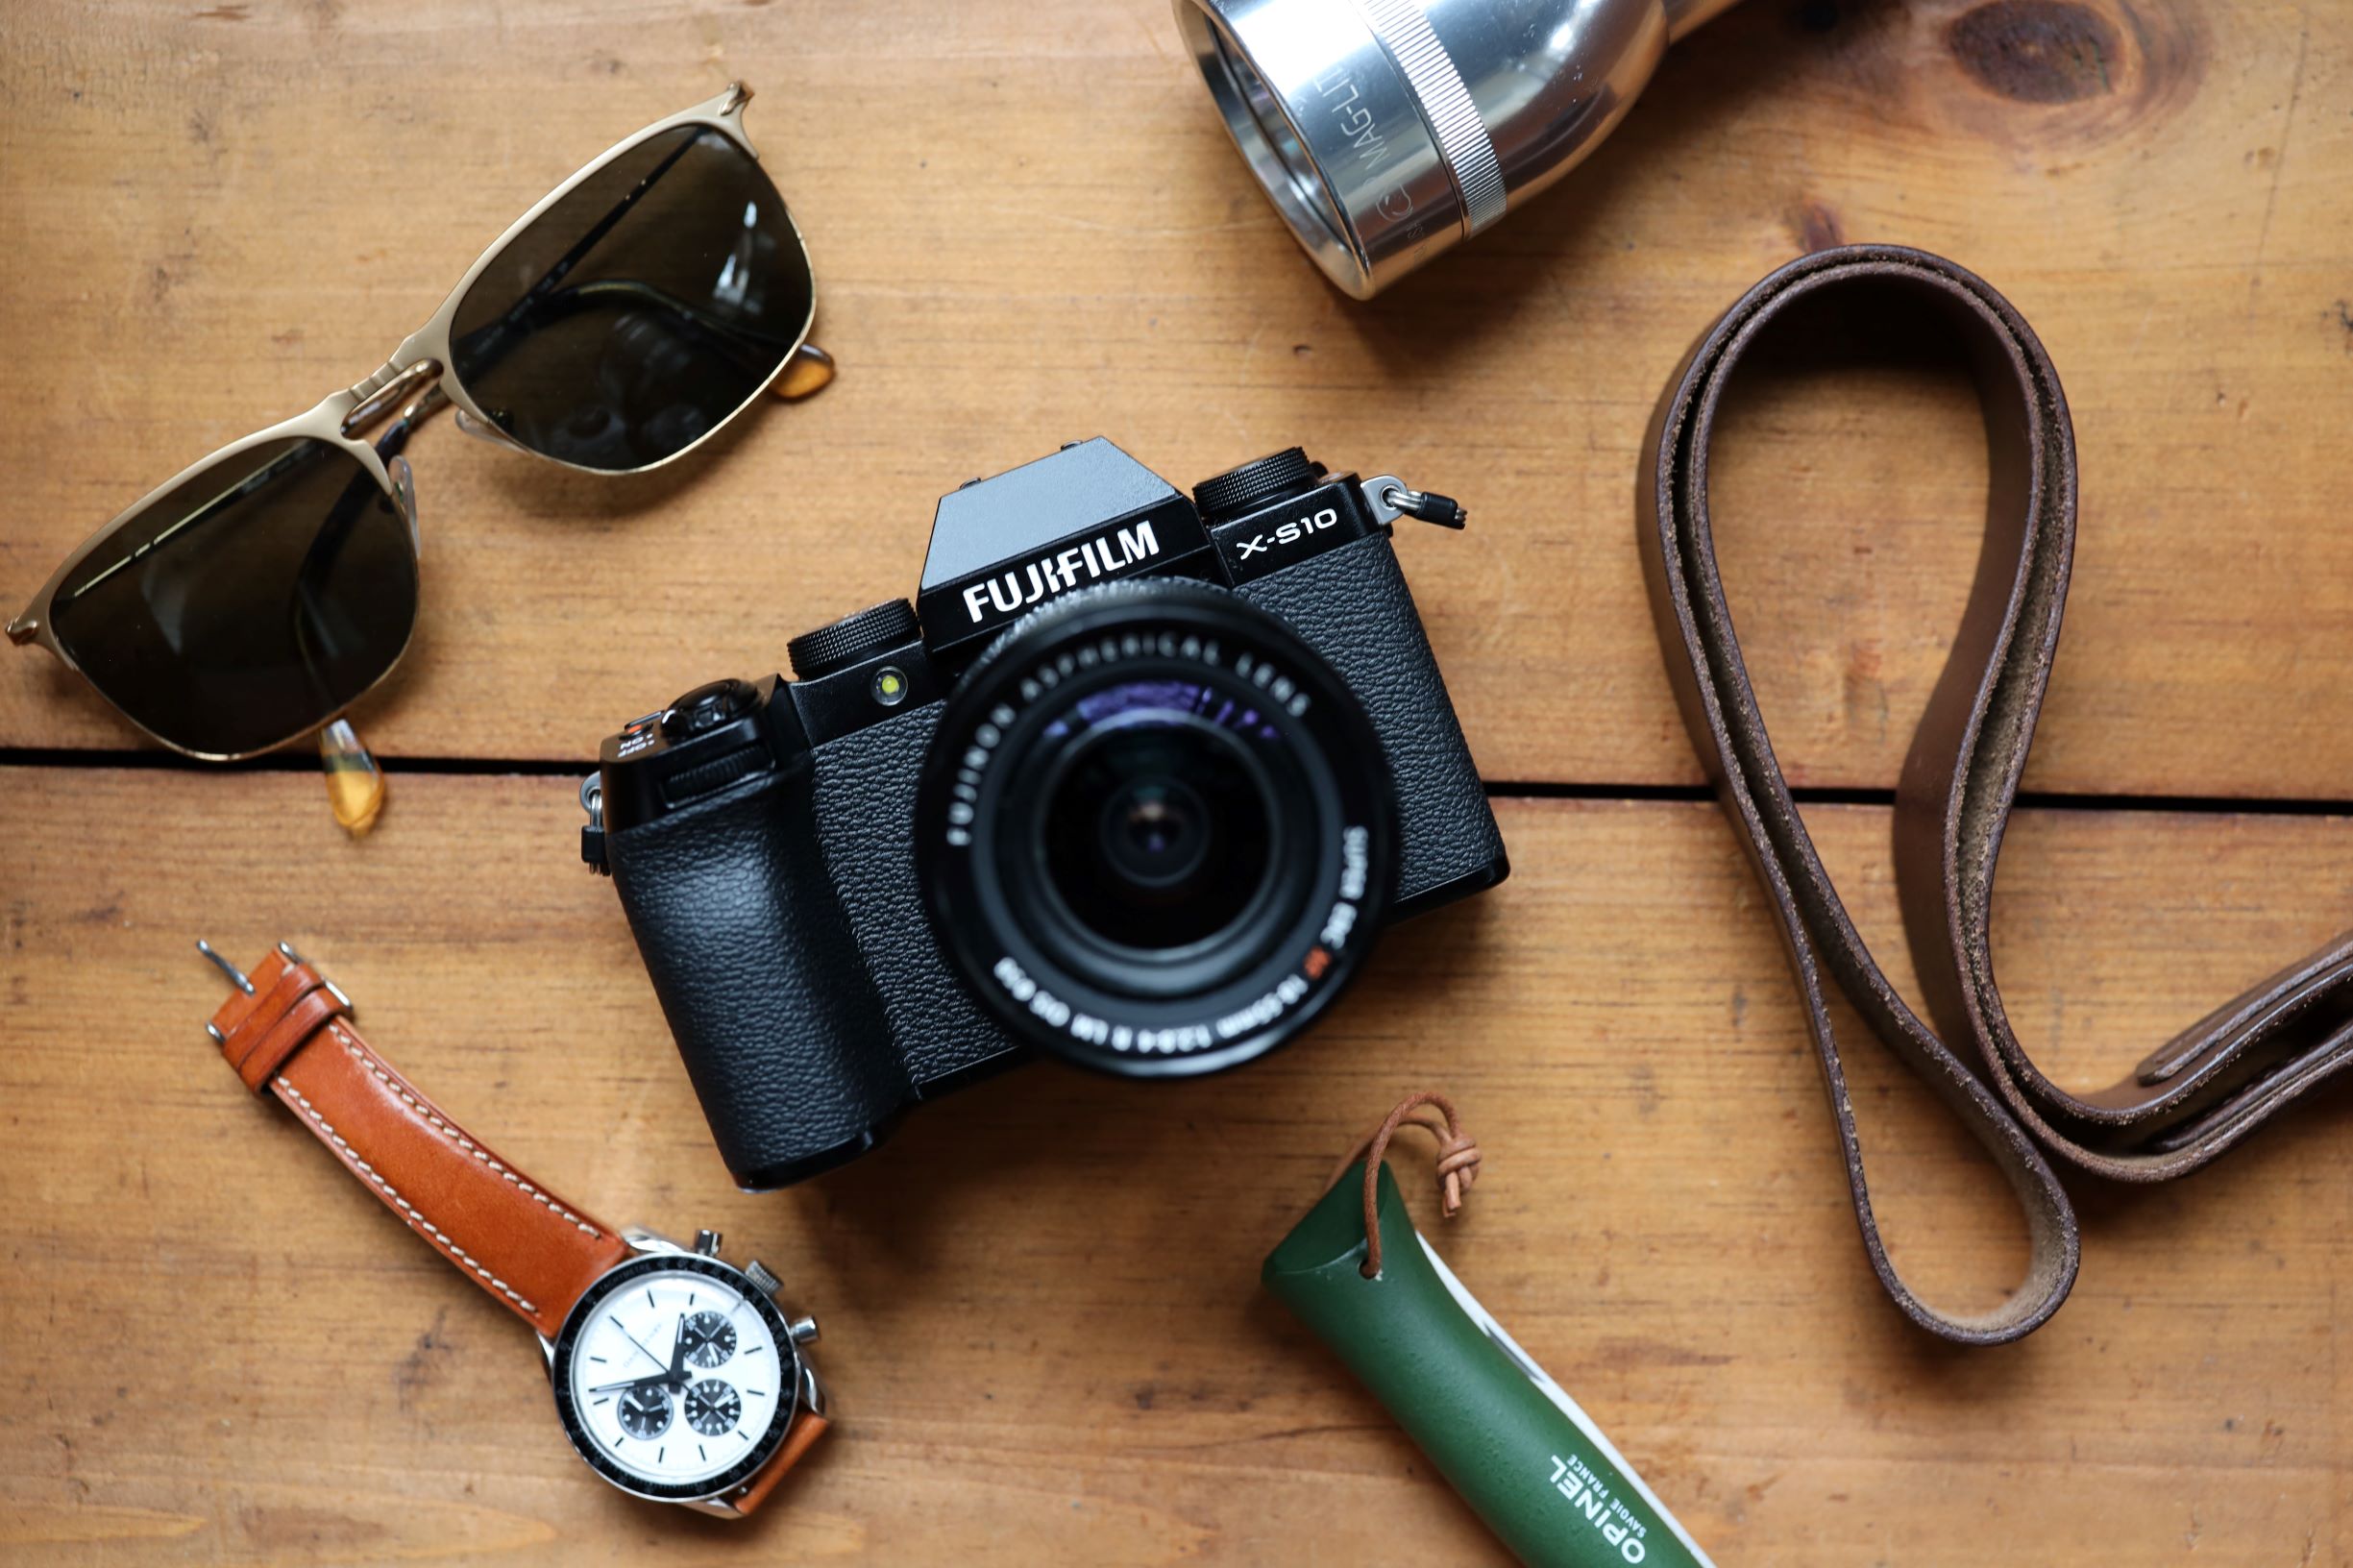 The Fujifilm X-S10 Is a Compact Pro Camera Loaded With Super Cool